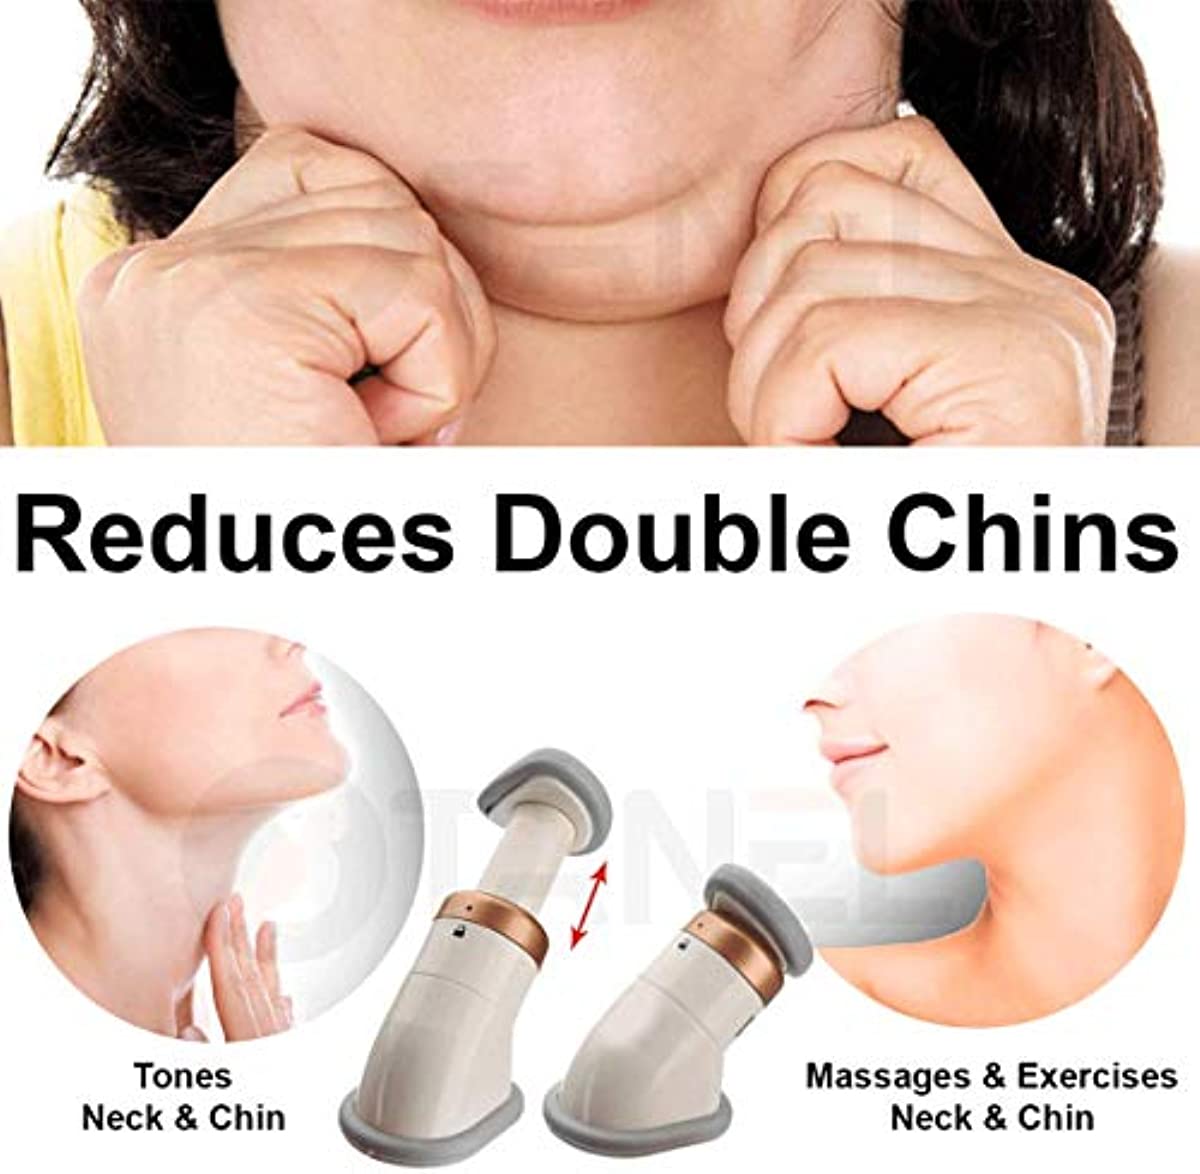 Neckline Portable Neck Slimmer and Jaw Exercise - Double Chin Reducer, Chin Exerciser and Neck Toner Device for Men and Women